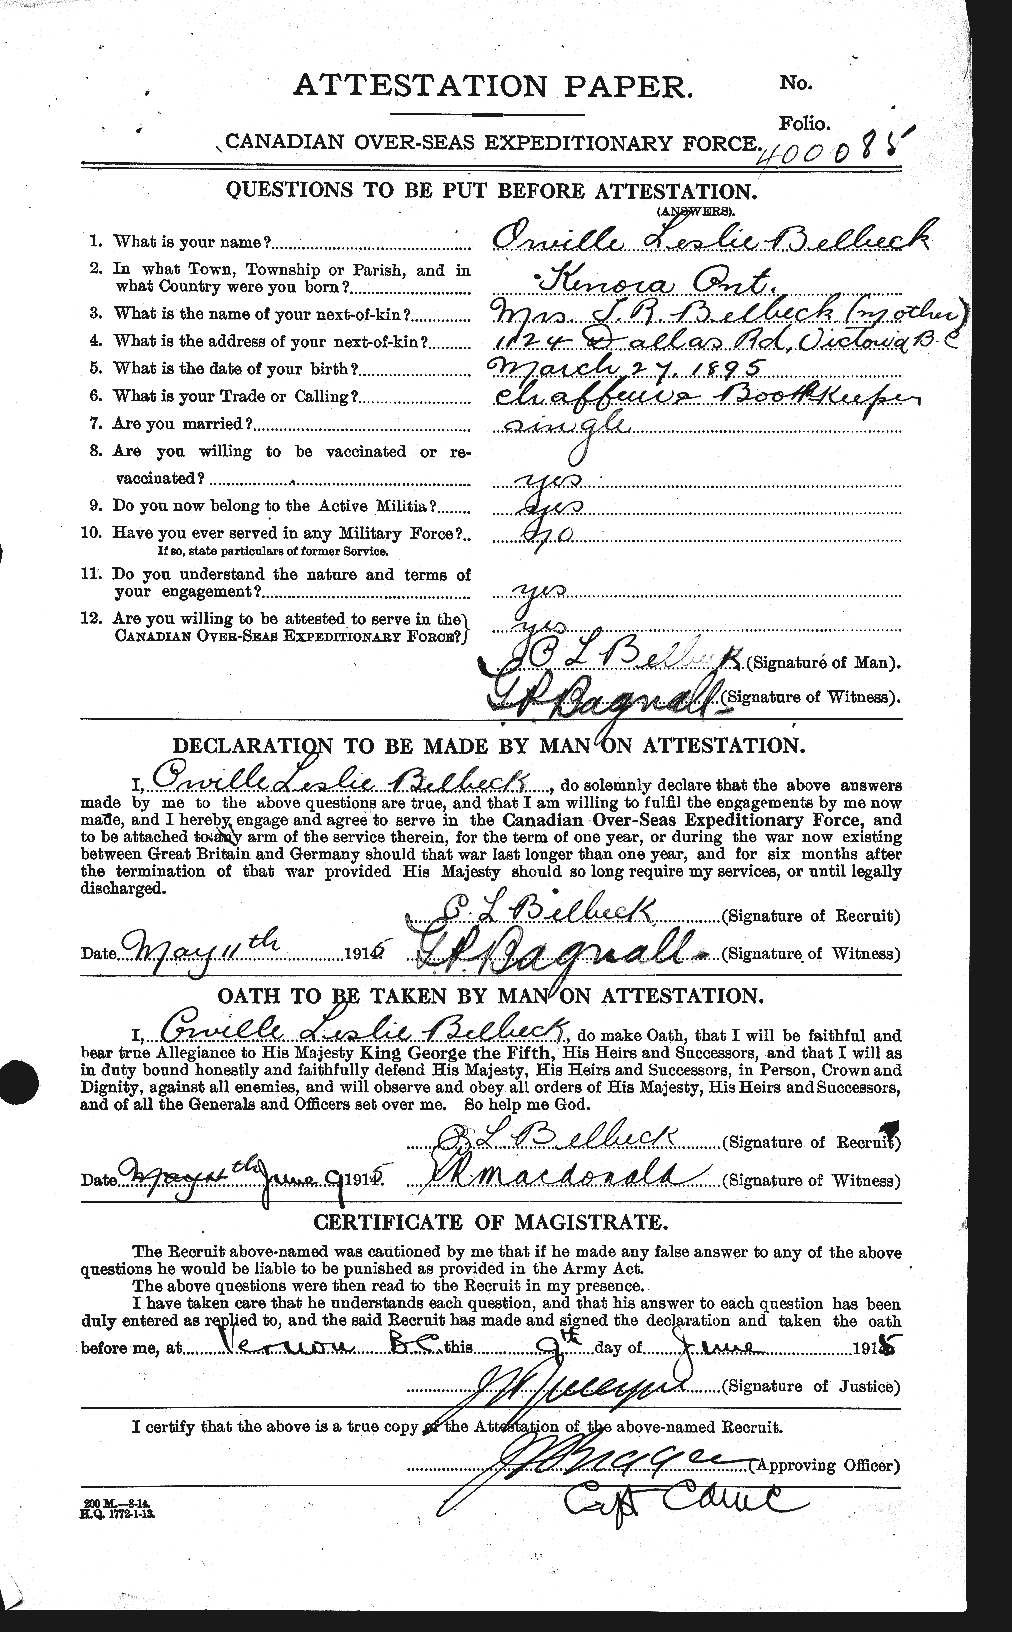 Personnel Records of the First World War - CEF 232624a